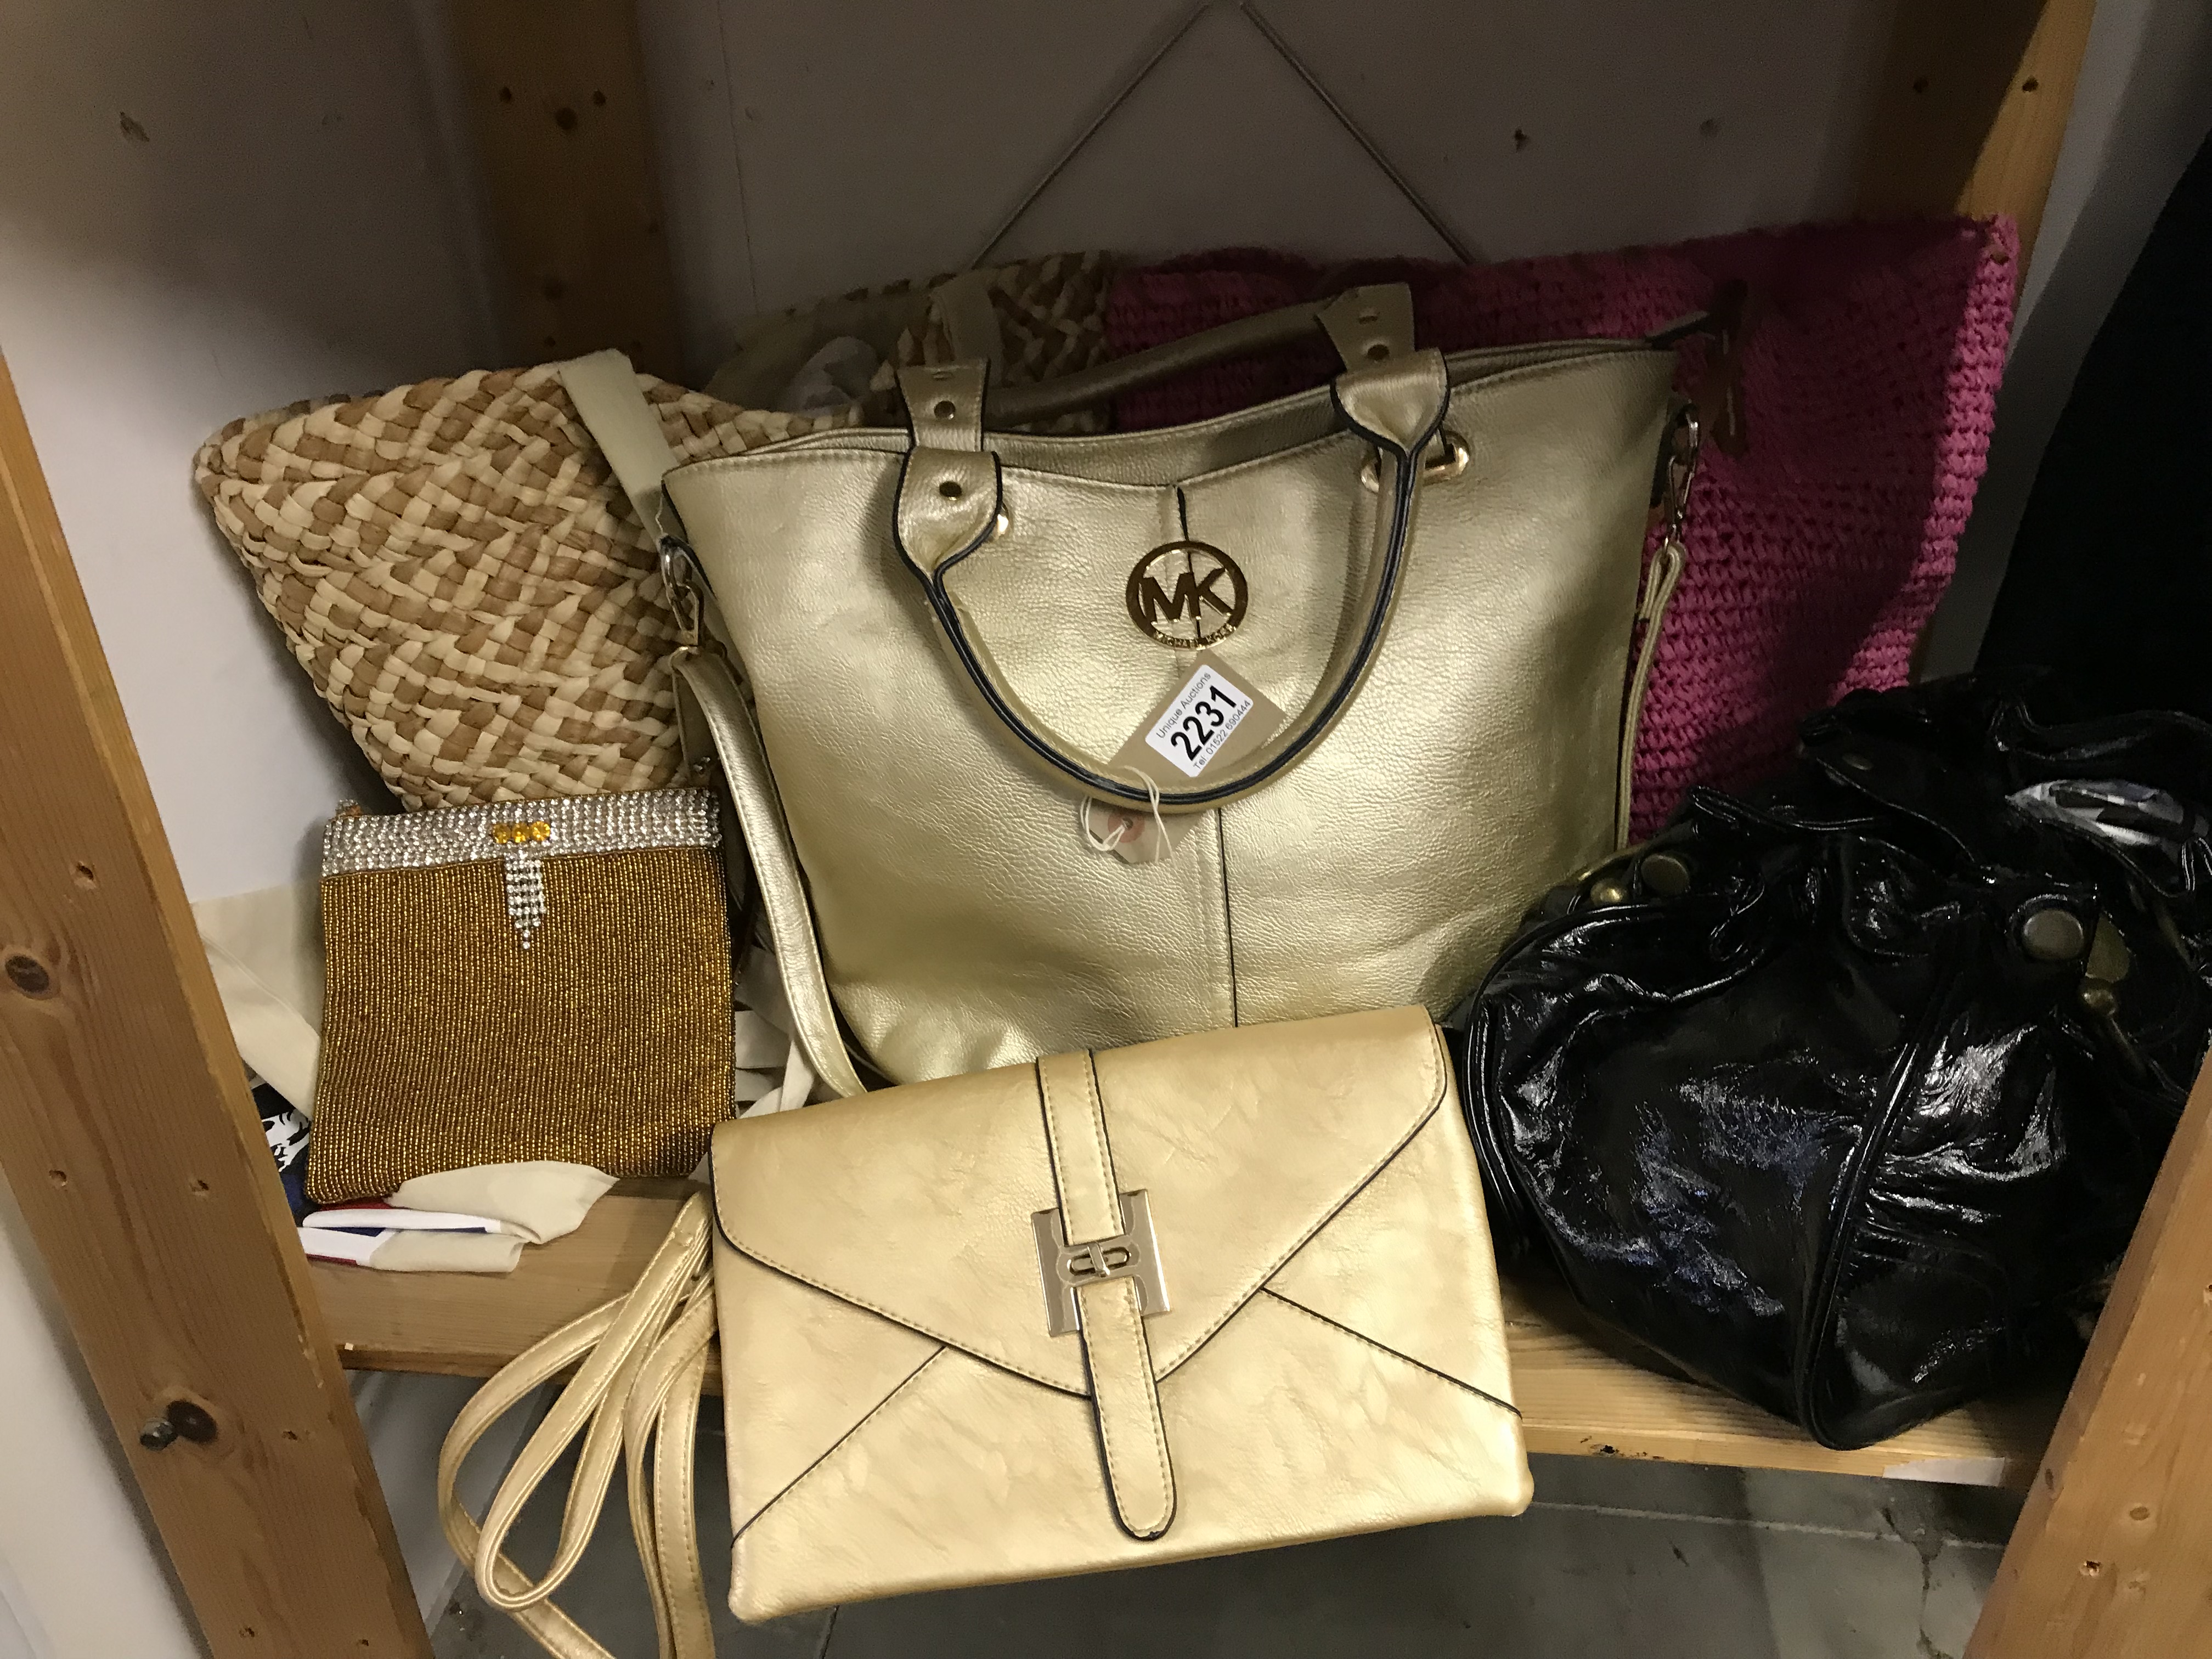 A collection handbags in various colours and styles